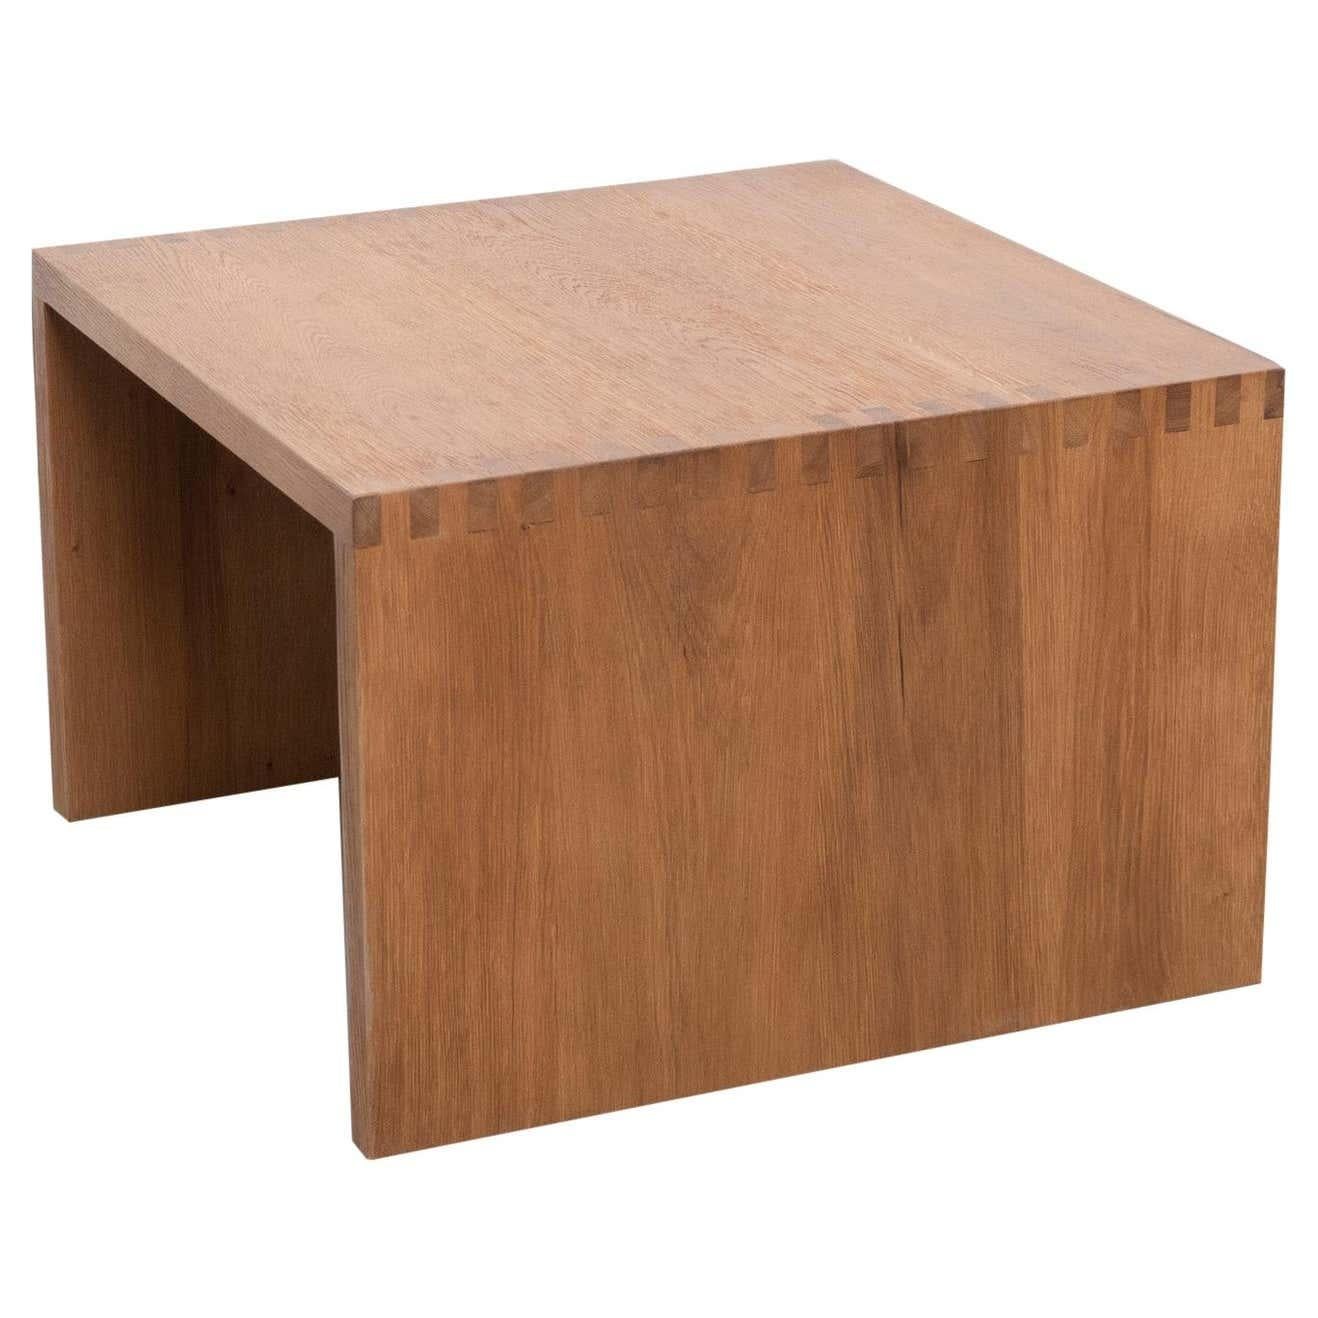 Table by Dada est. manufactured in Barcelona, 2021.

Material: Oak
Dimensions: 60 cm D x 60 cm W x 40 cm H 

Production delay: 8-9 weeks

There is the possibility of making it in different measures and woods.

Dada Est. Makes a handmade